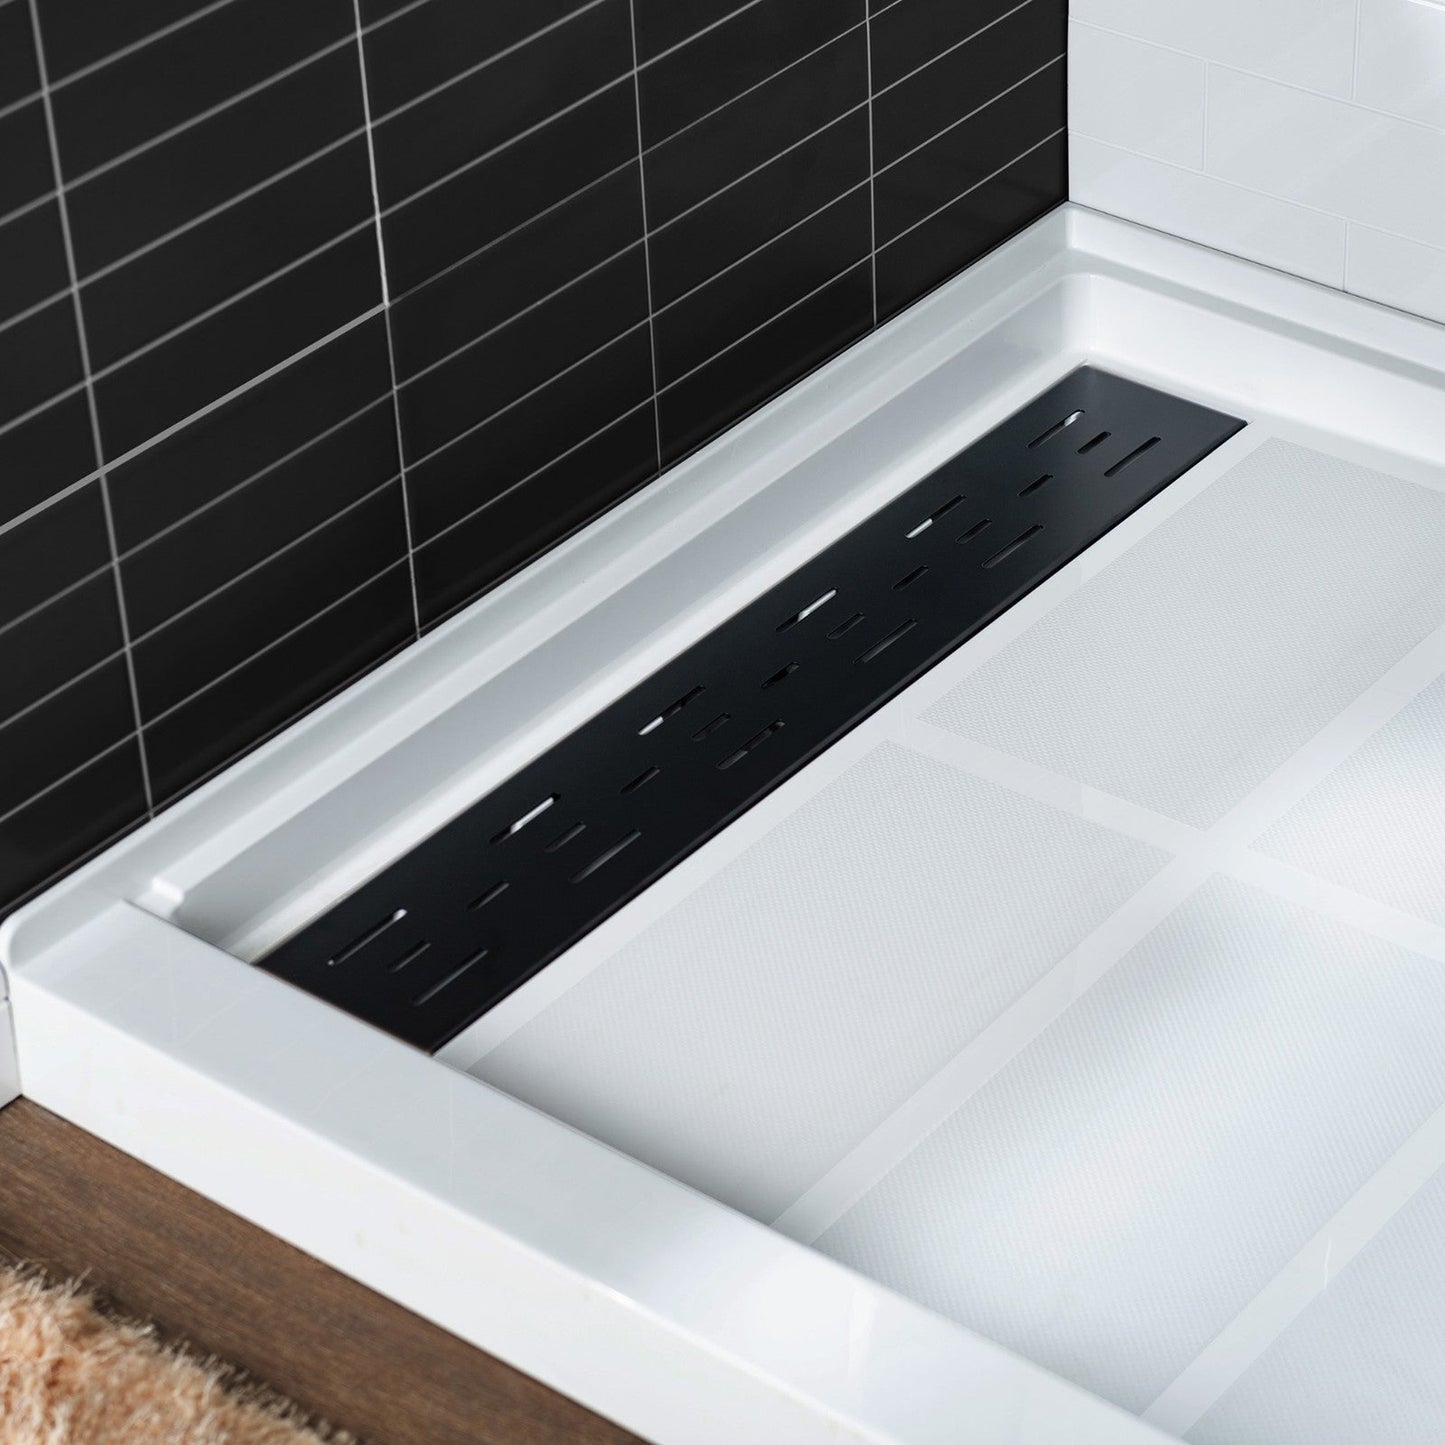 WoodBridge 48" x 32" White Solid Surface Shower Base Left Drain Location With Matte Black Trench Drain Cover